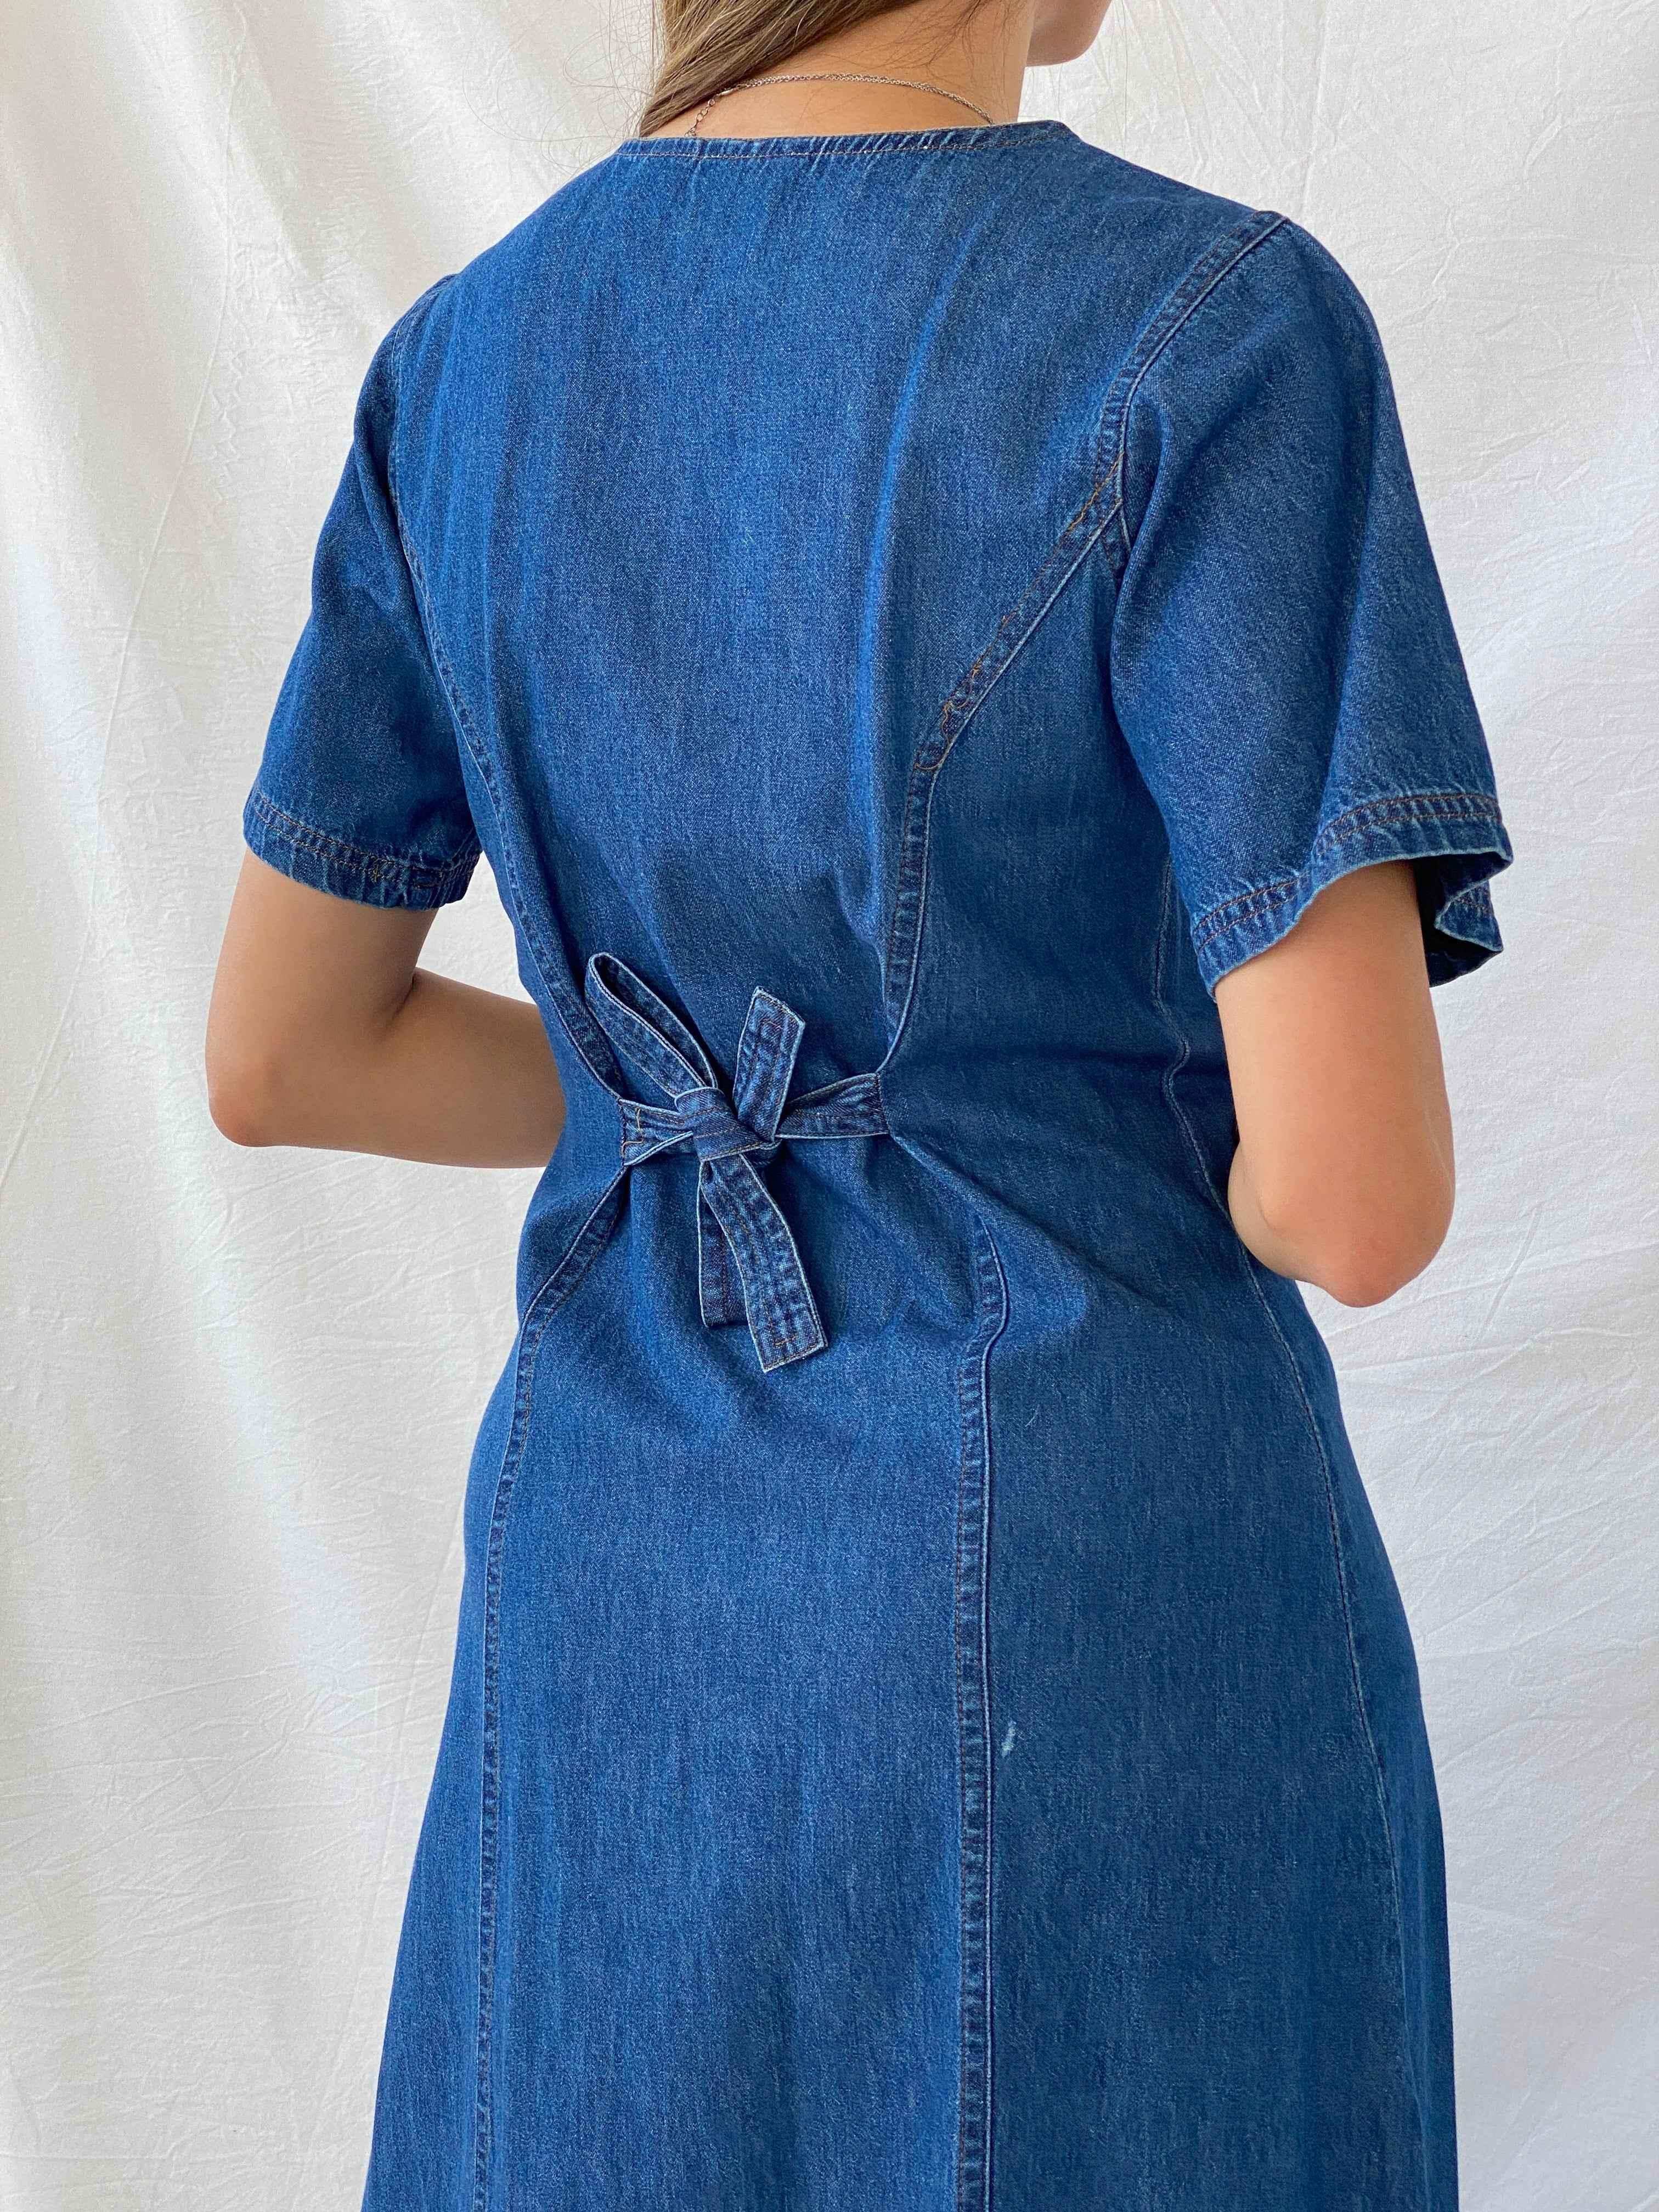 Long Denim Dress Women Summer Short Sleeved Maxi Ankle Length Jeans Pockets  Buttons Fashion Casual Clothes Outweardres size M Color Light blue